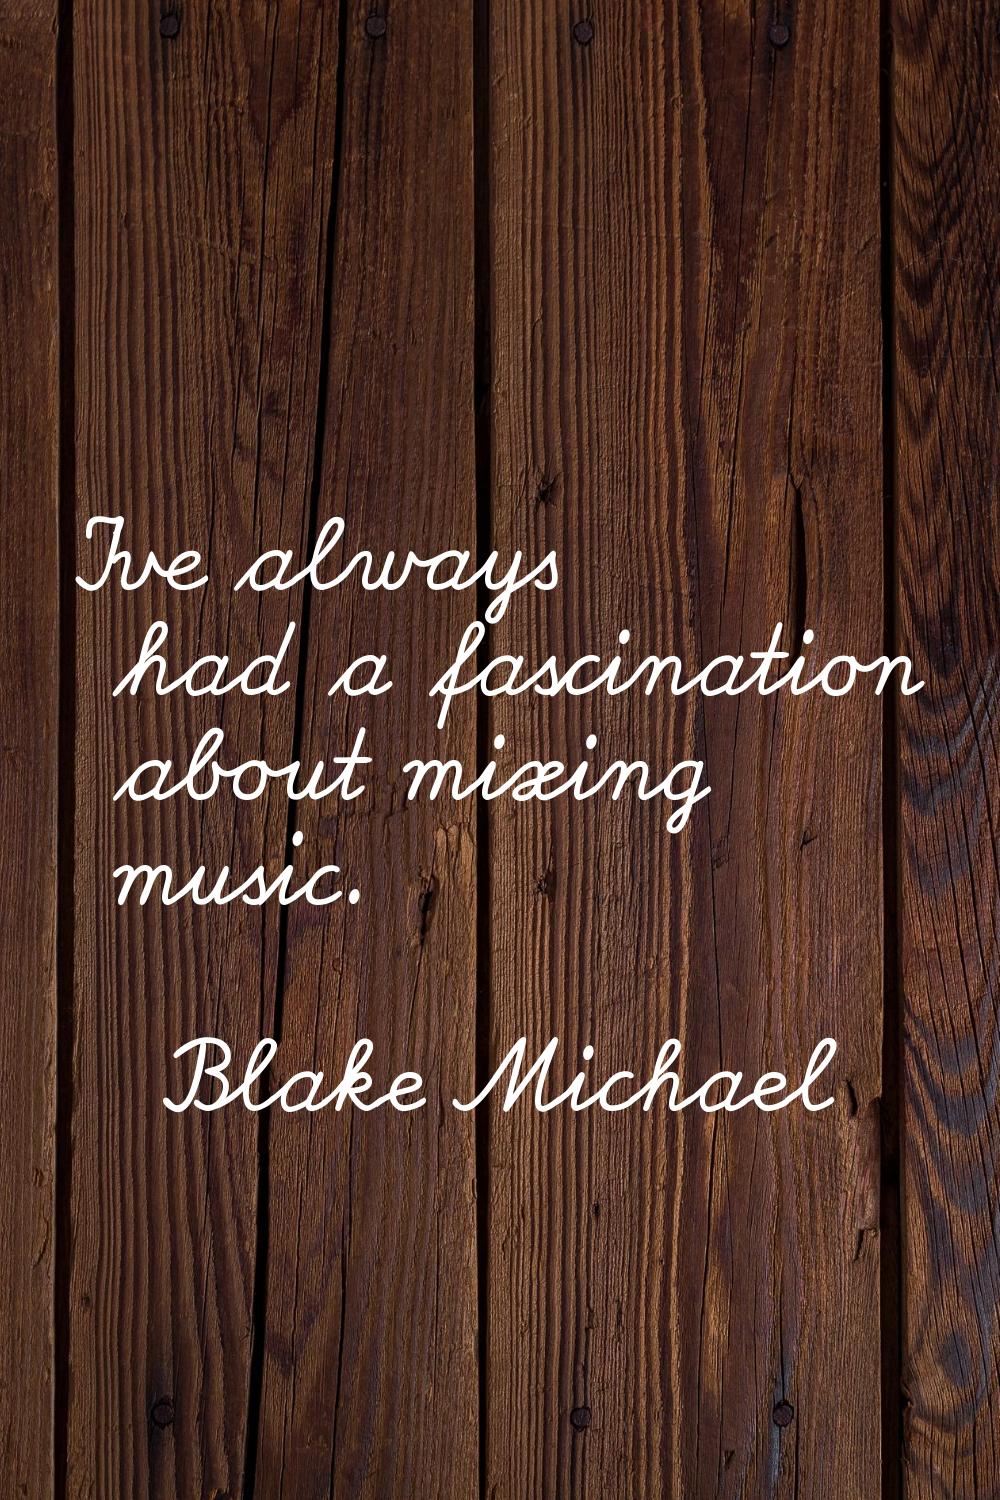 I've always had a fascination about mixing music.